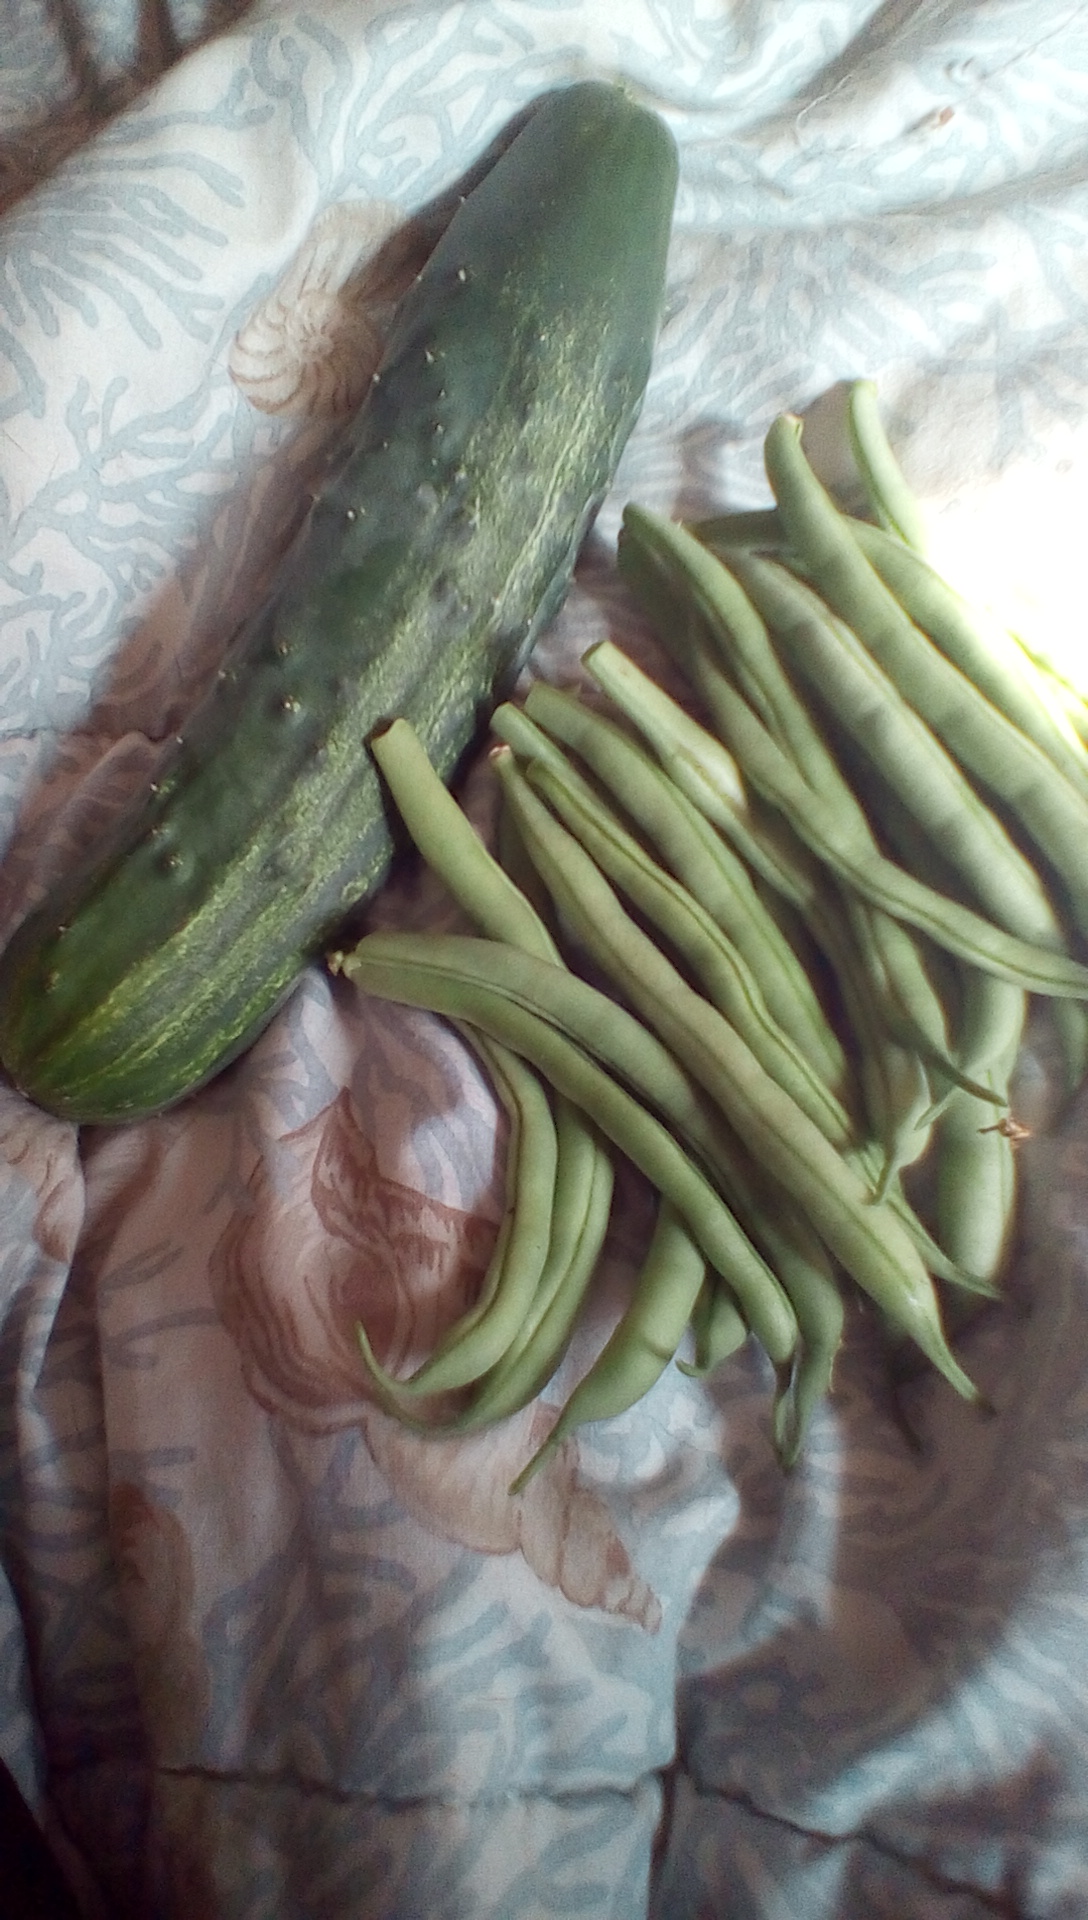 Cucumber and green beans